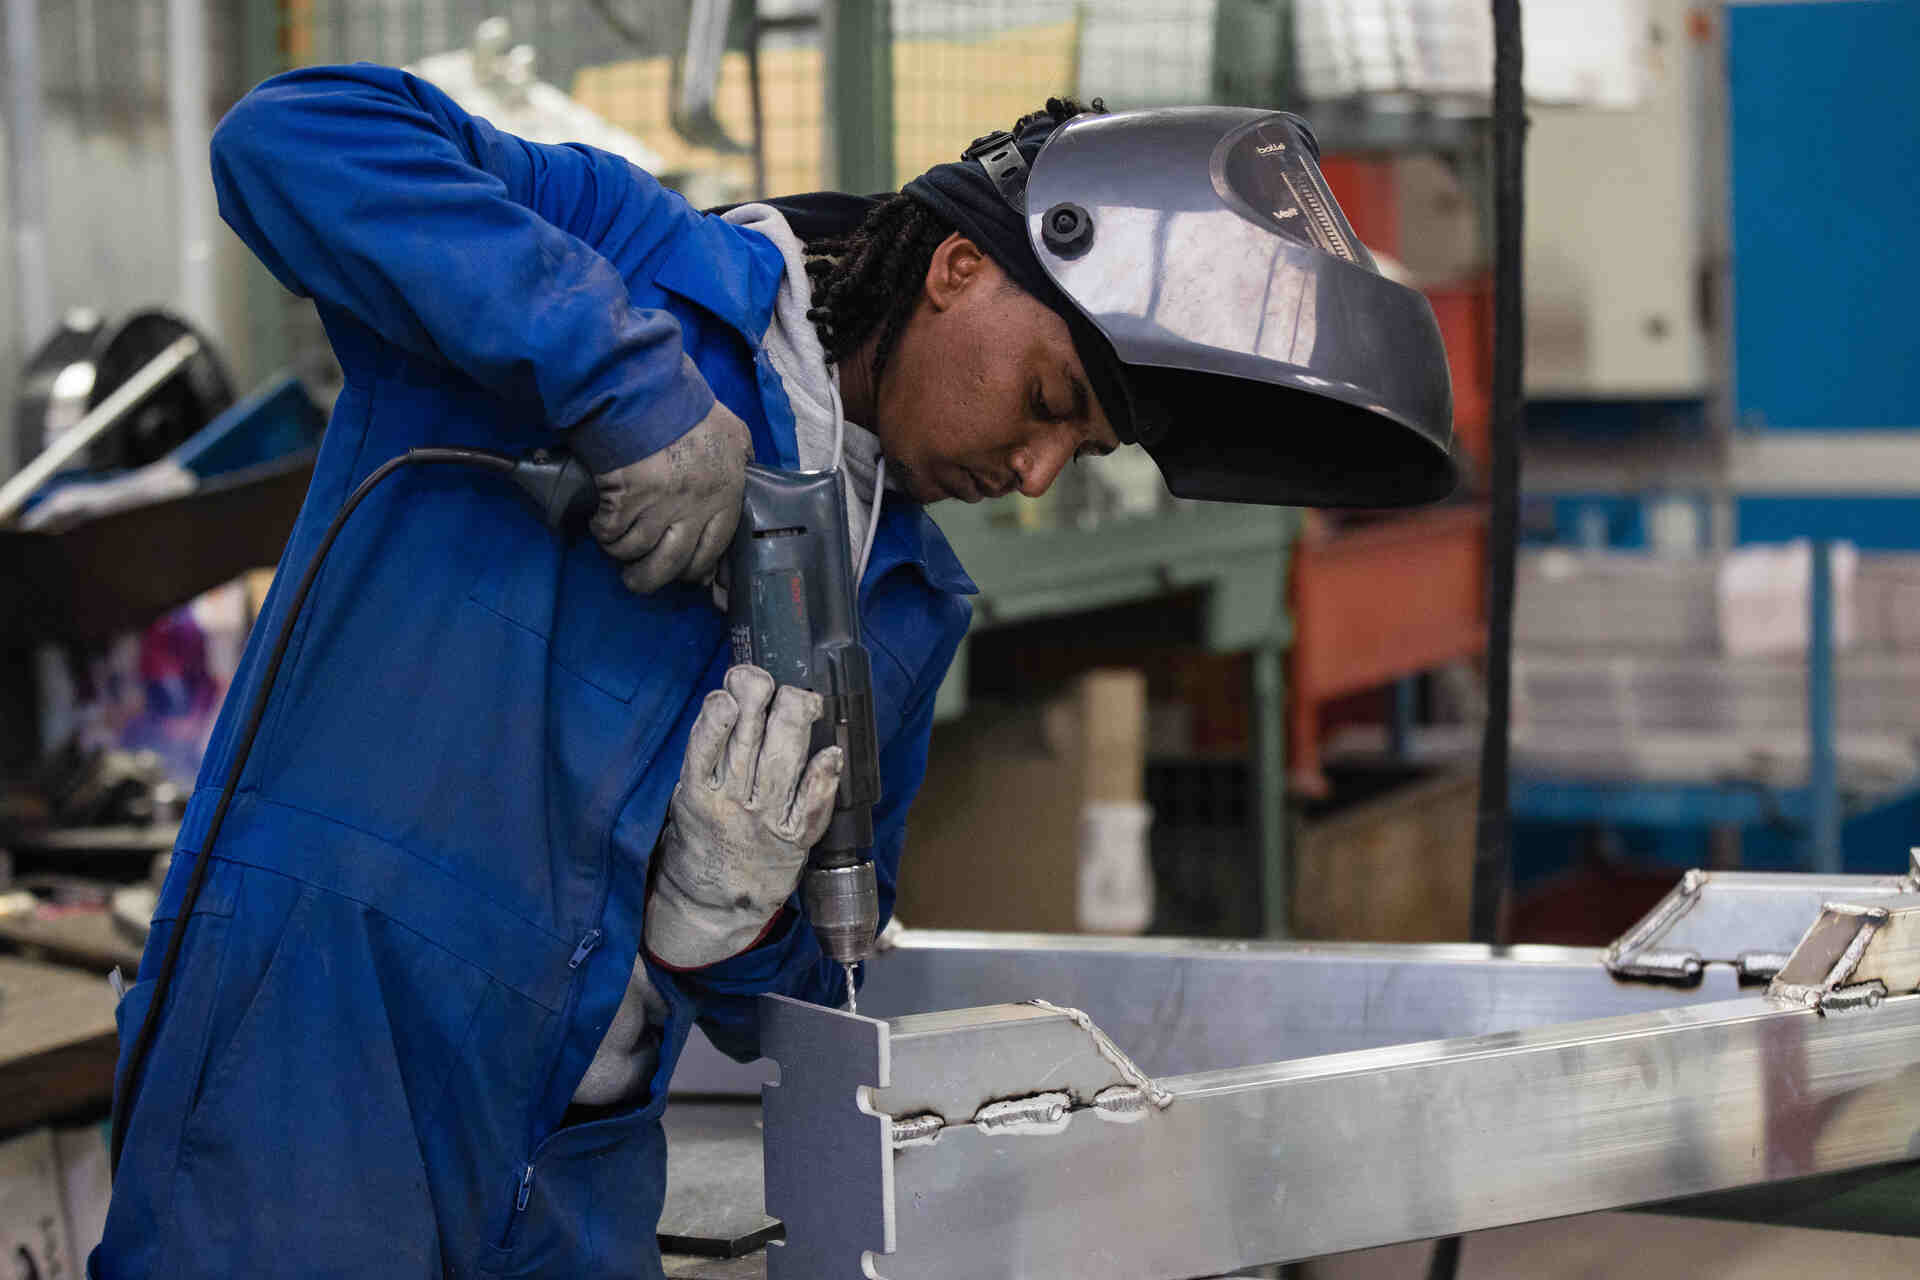 Worker in a blue coverall and protective helmet using a power tool to work on a metal piece in an industrial setting with machinery in the background.